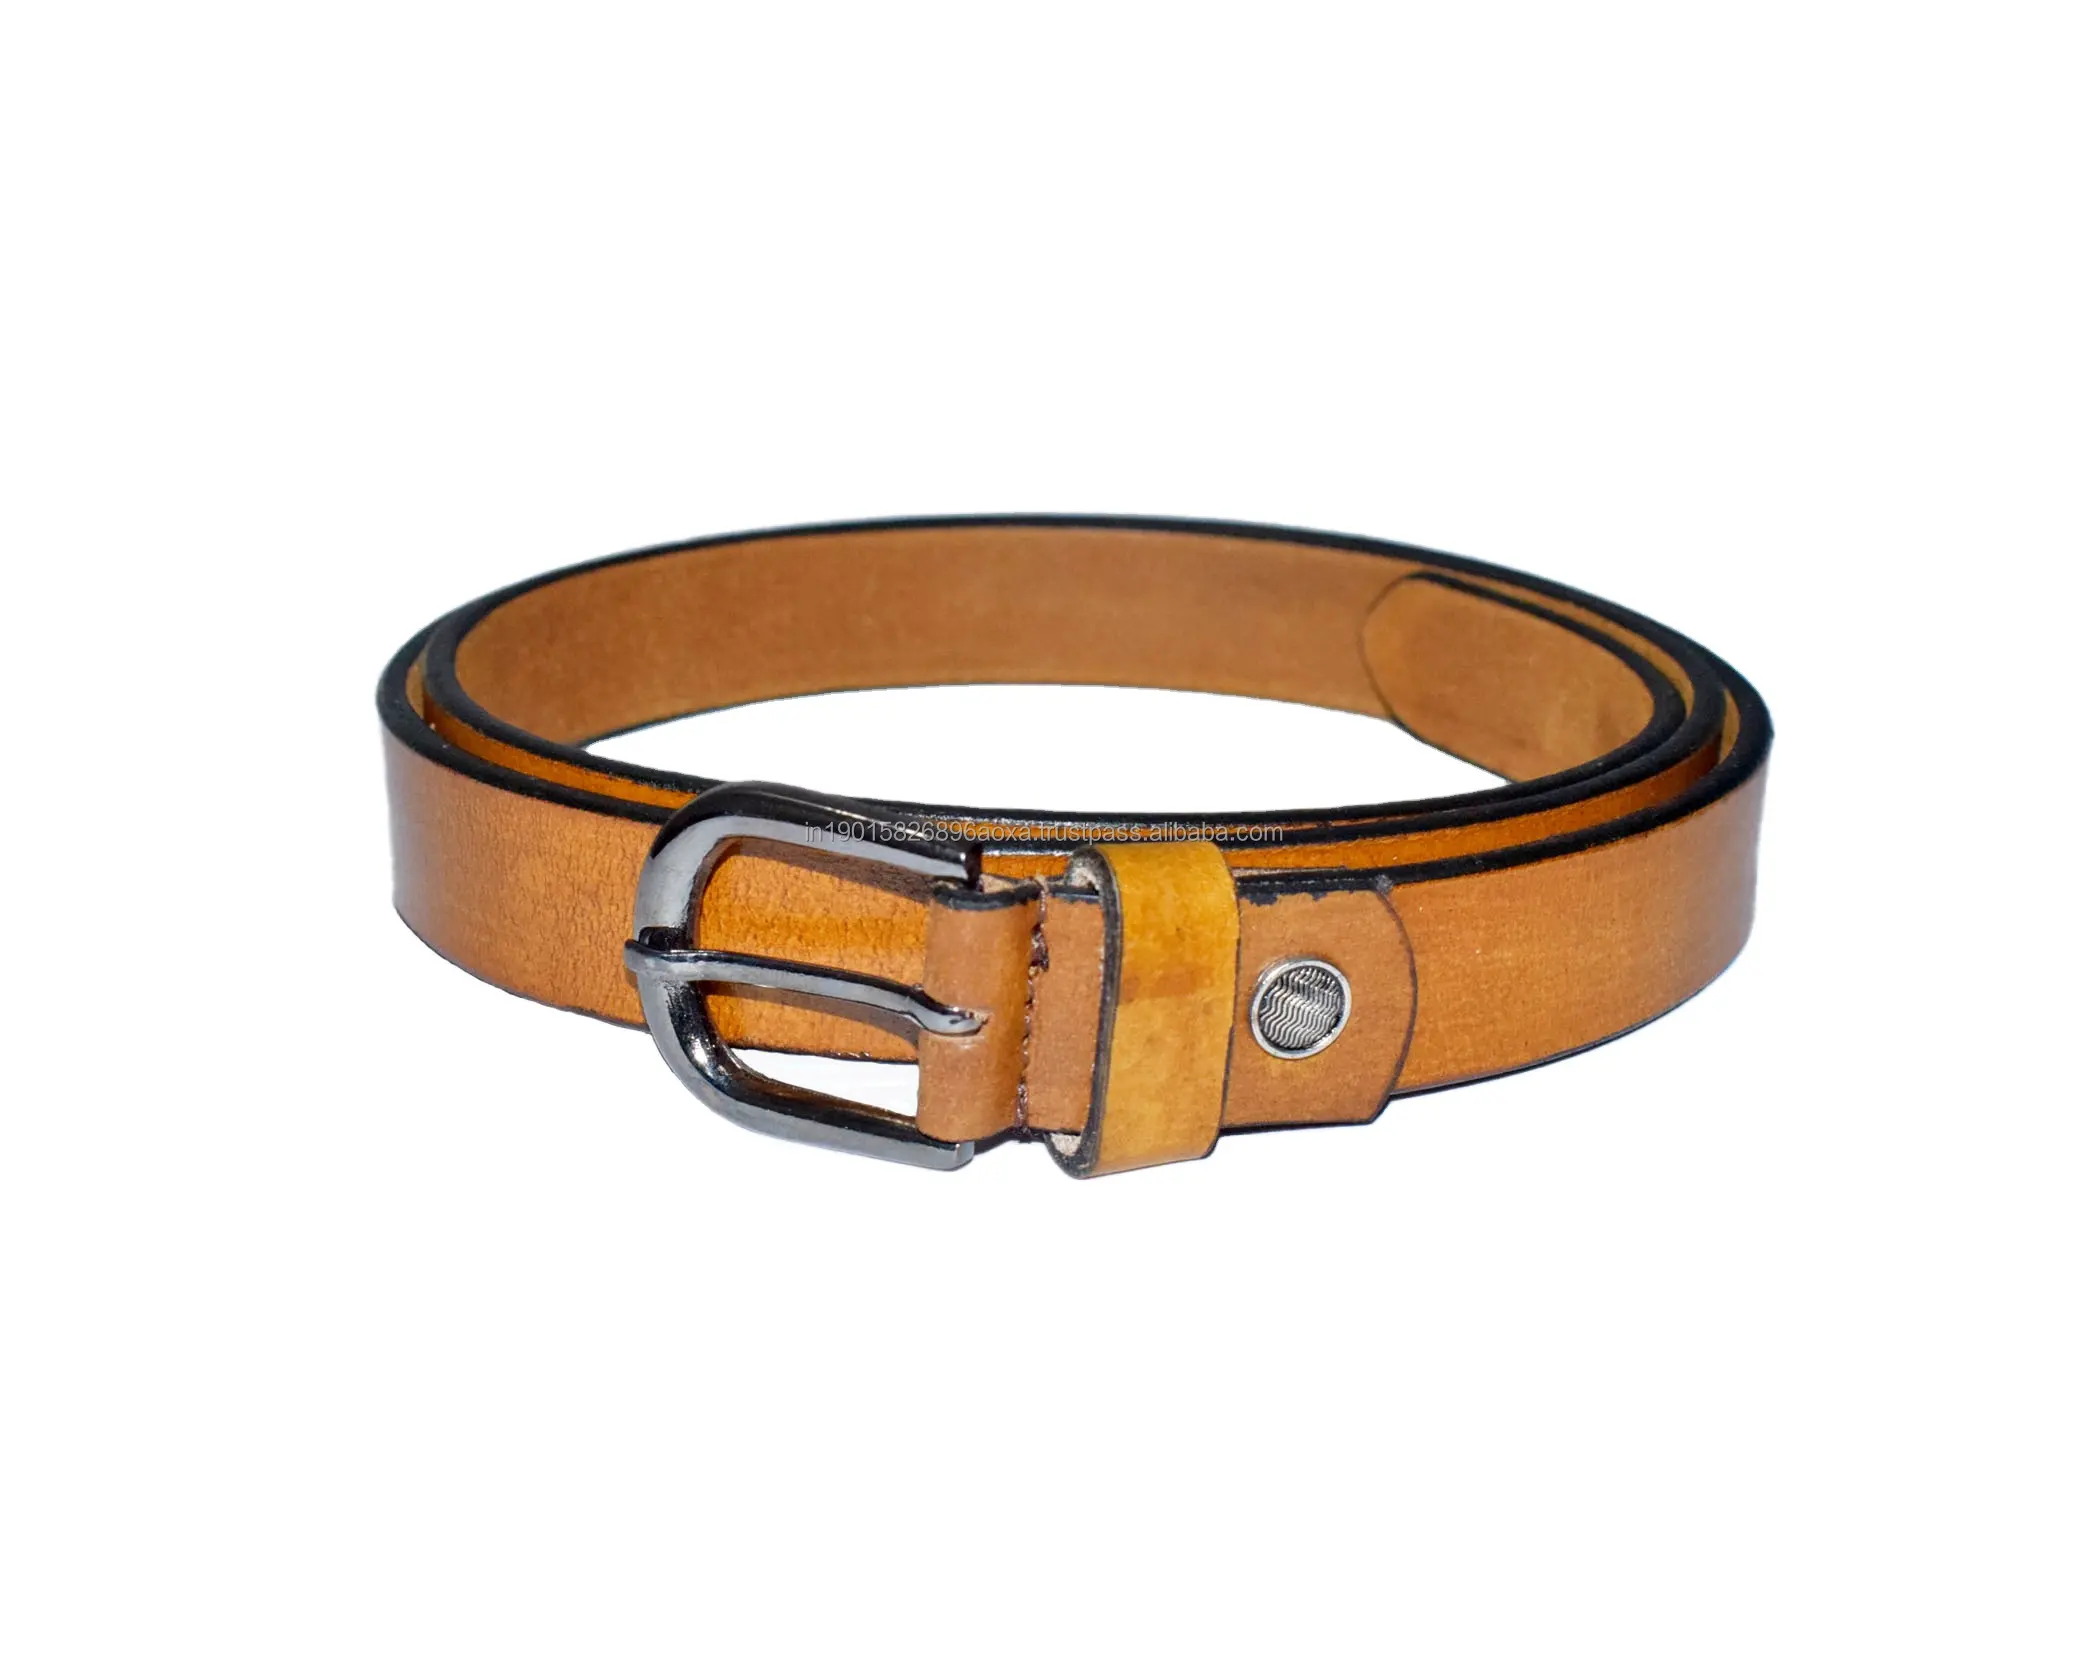 2022 Special Design For woman 100% Pure Leather Belt Wholesale Fashion Business Retail Genuine Leather Yellow Belt